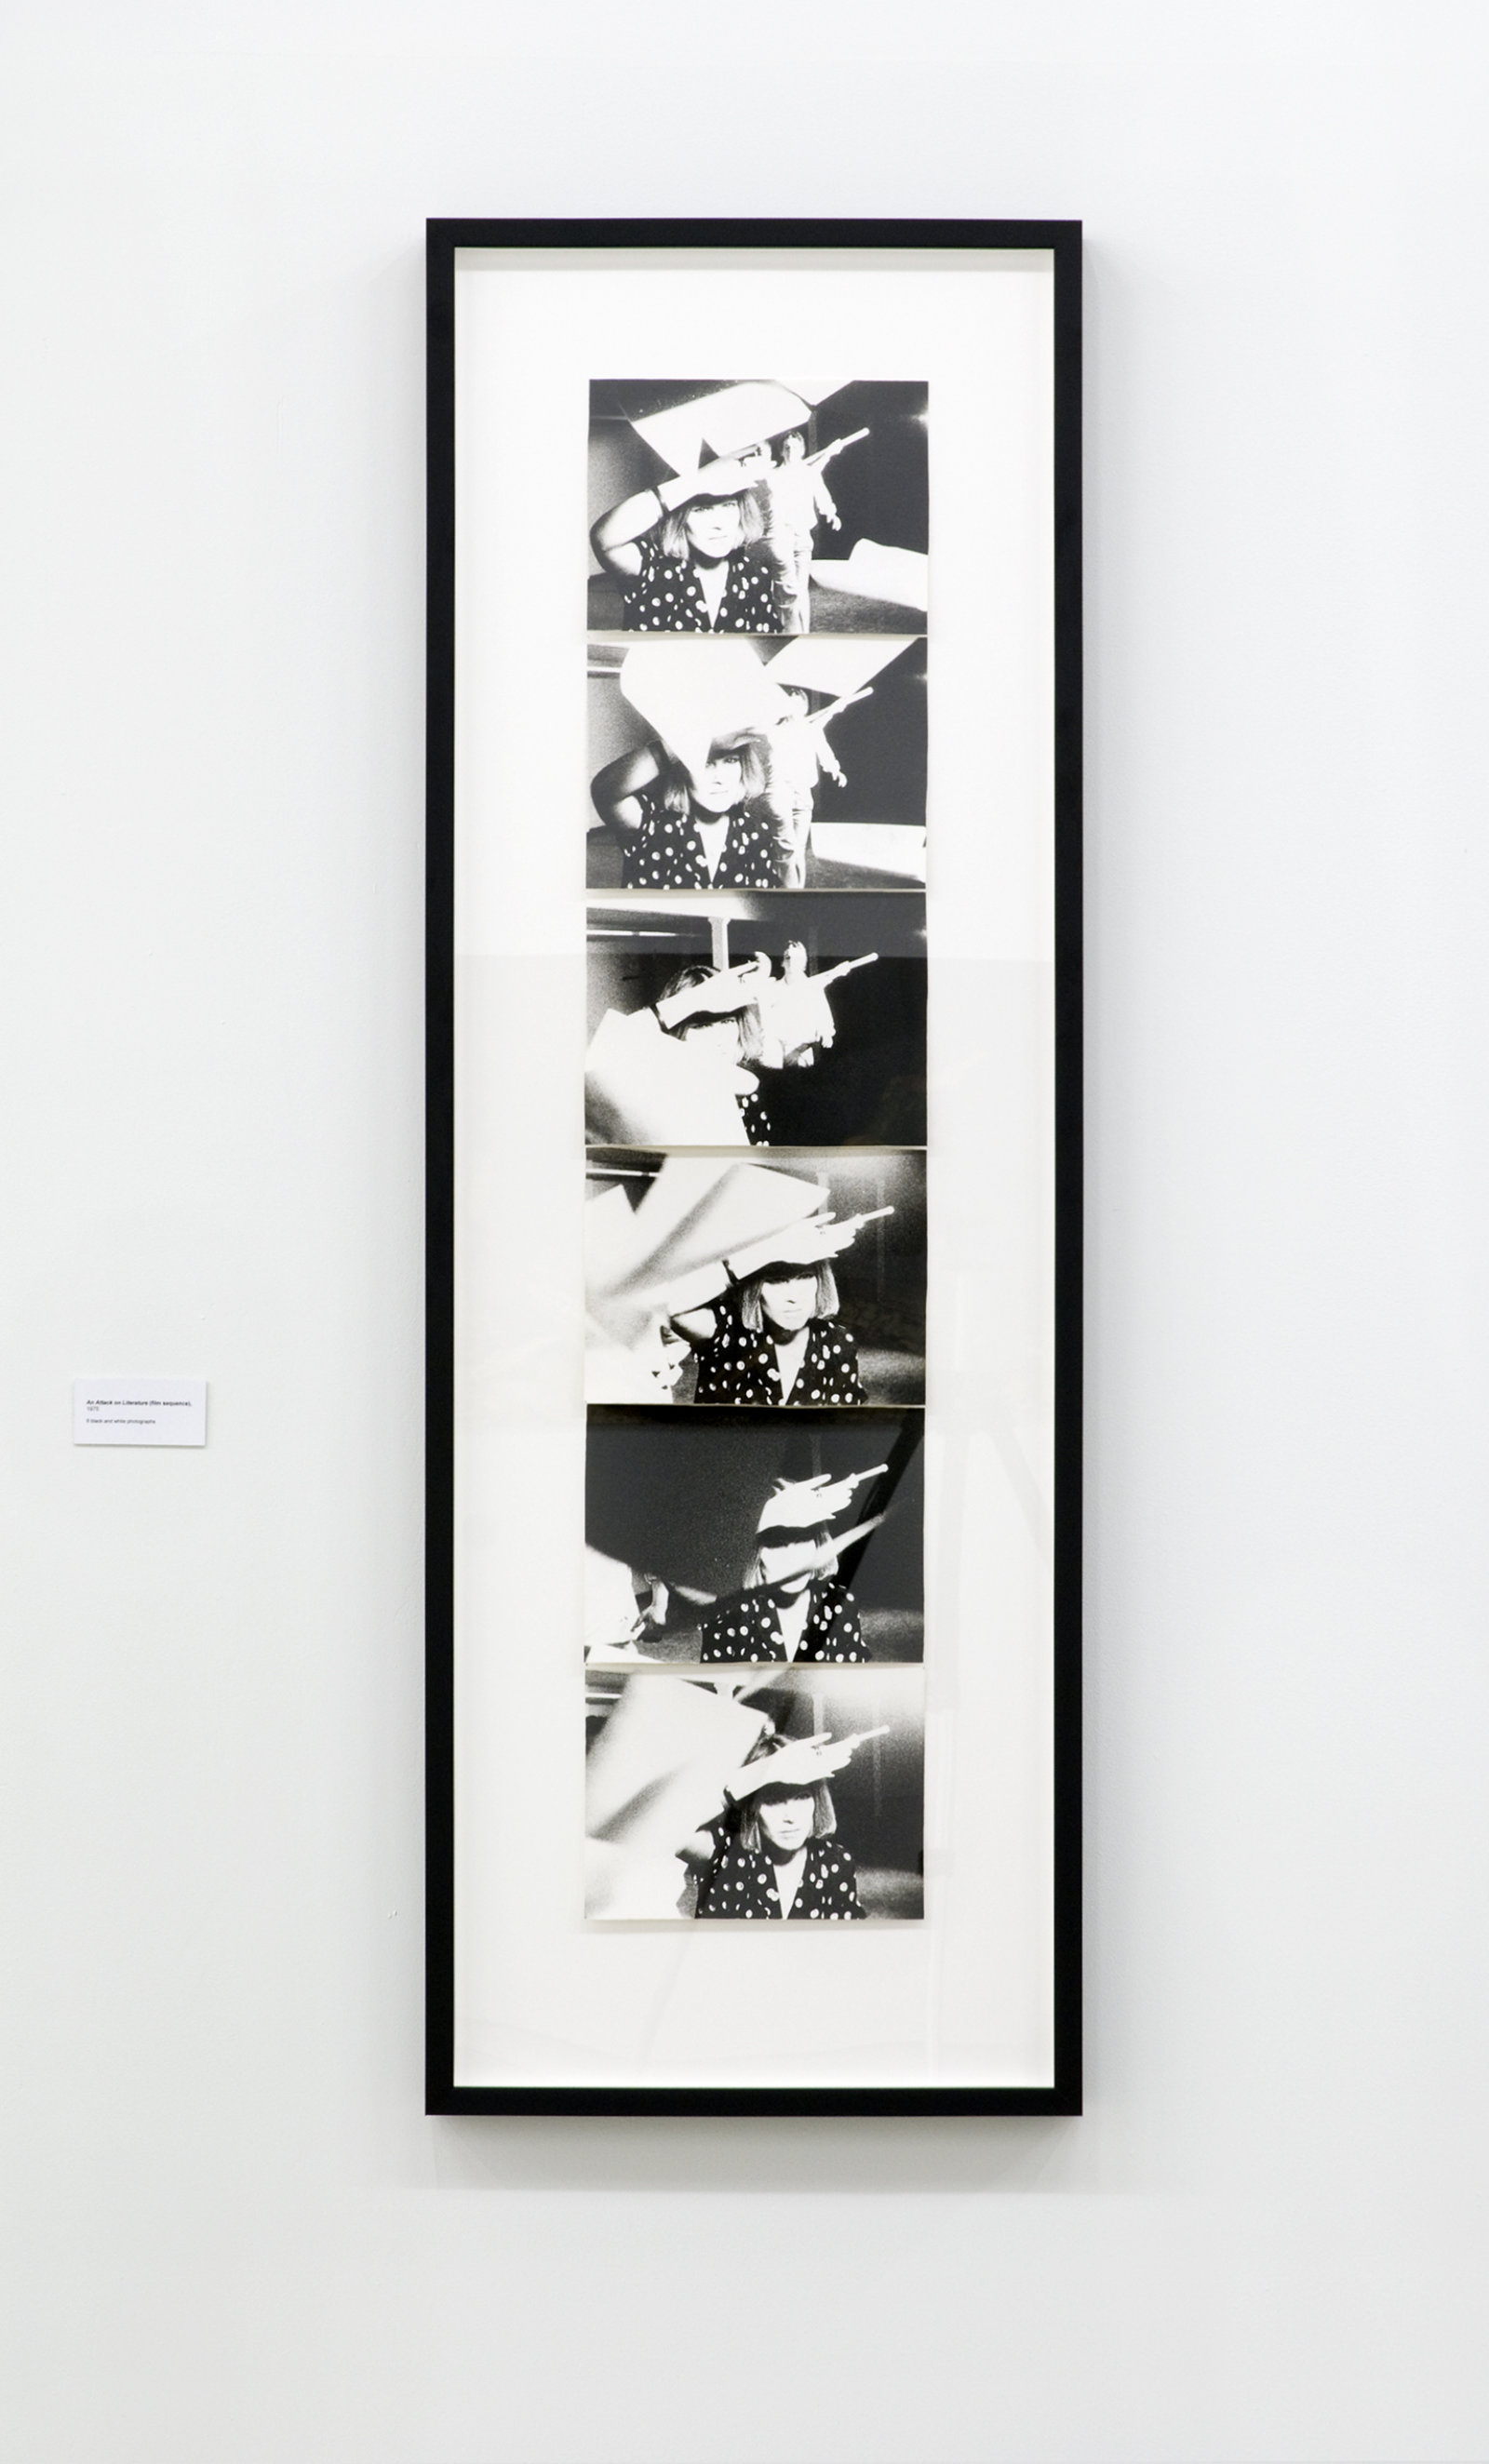 Ian Wallace, An Attack on Literature (film sequence), 1975, 6 black and white photographs, each 8 x 10 in. (19 x 25 cm)